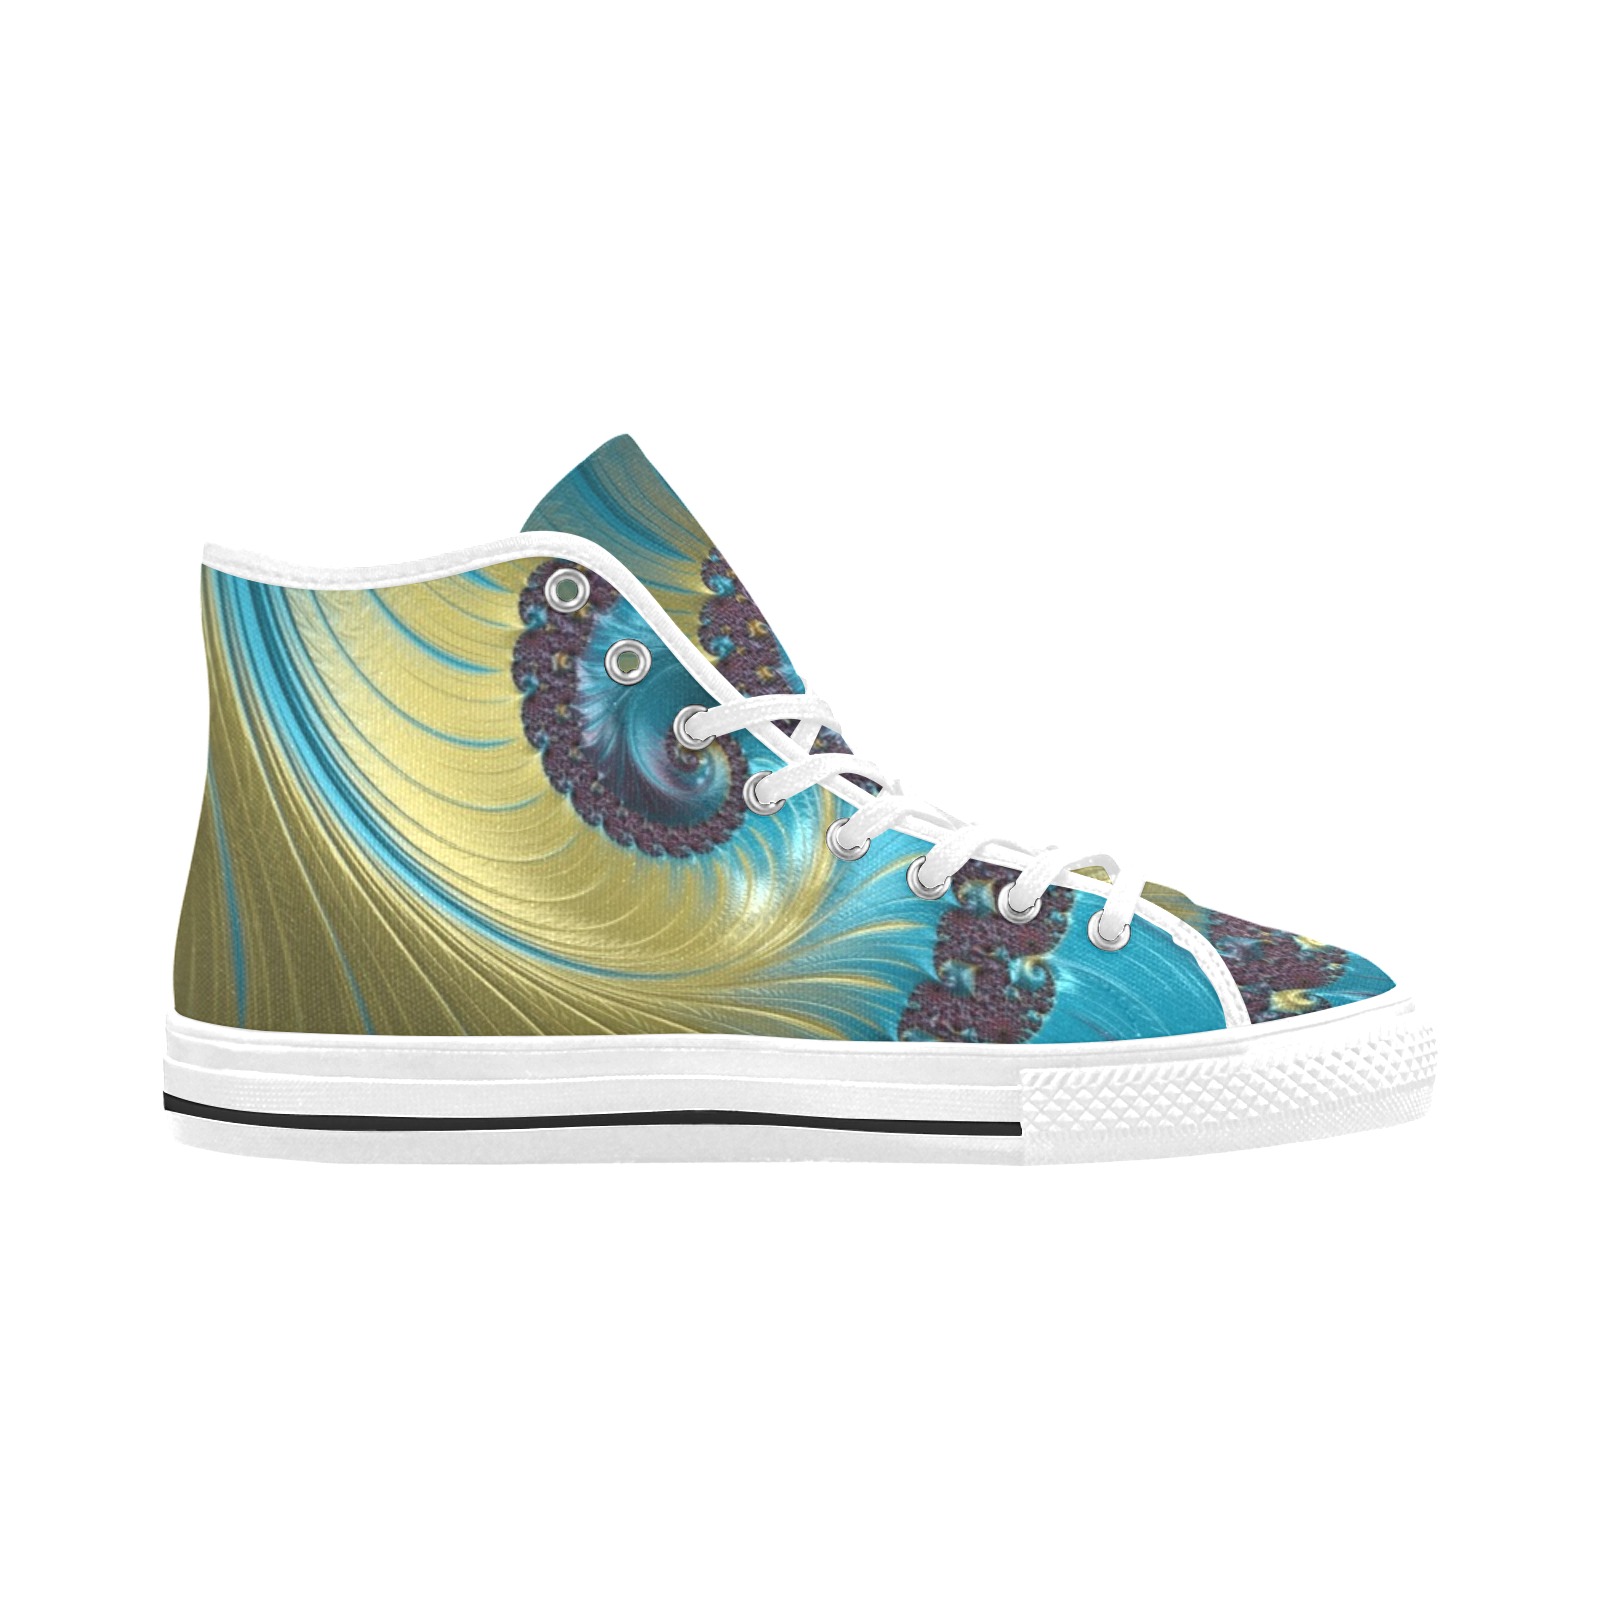 Turquoise and Gold Spiral Fractal Abstract Vancouver H Women's Canvas Shoes (1013-1)